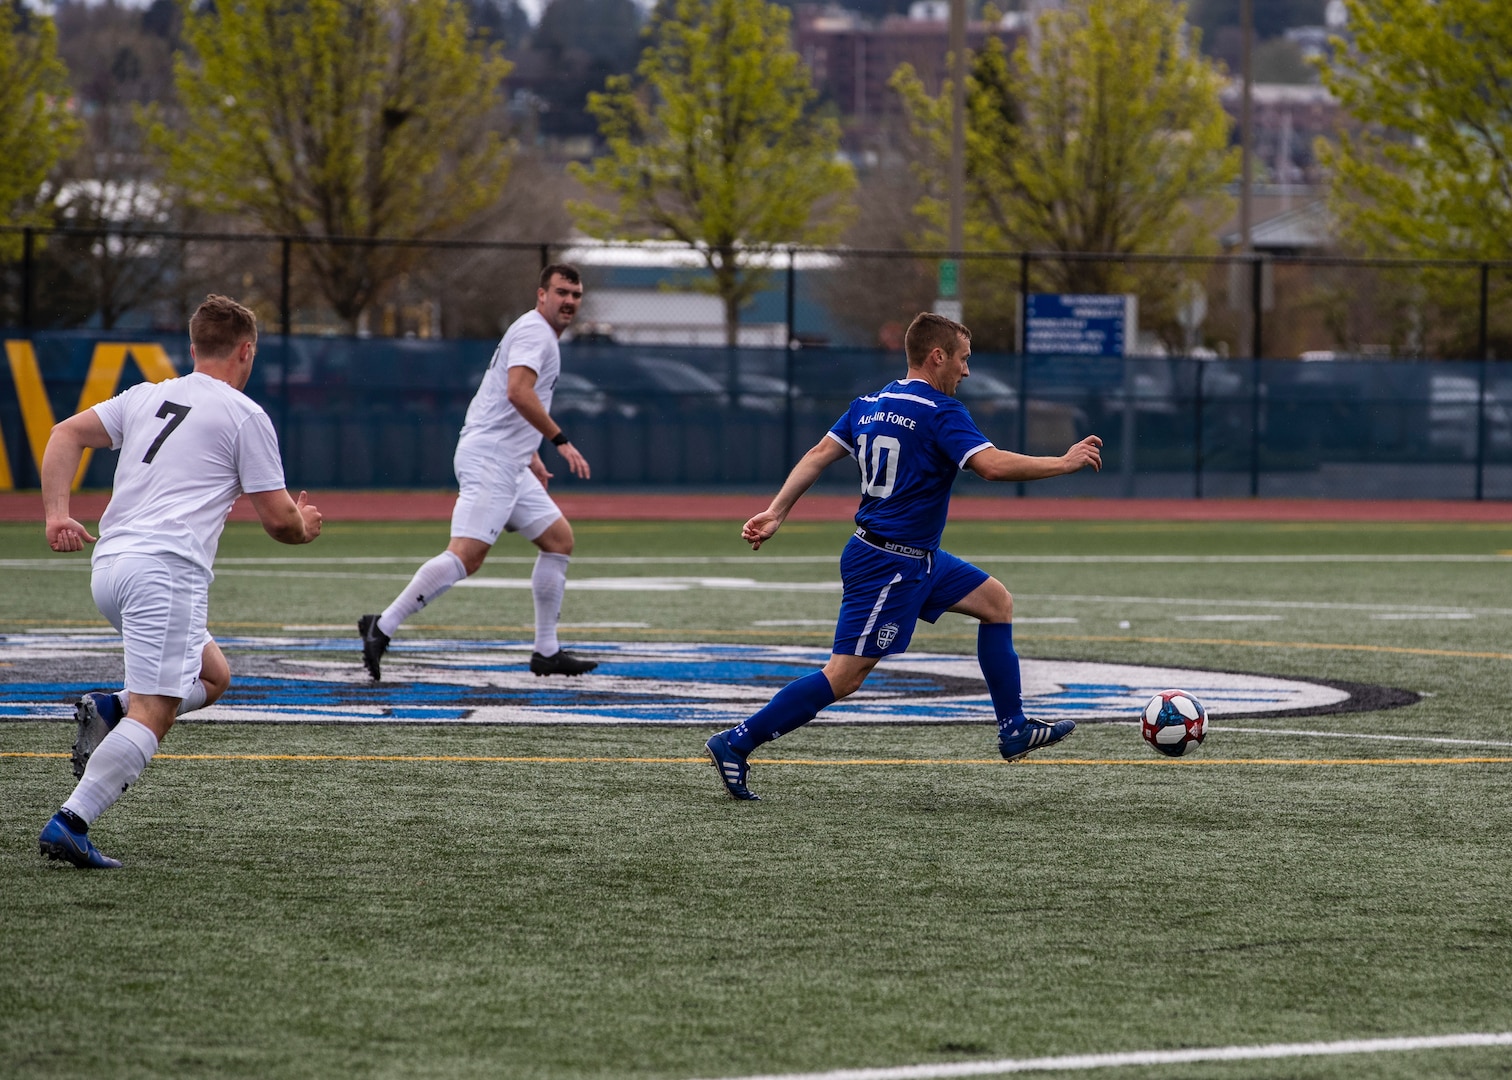 NAVAL STATION EVERETT, Wash. (April 18, 2019) -- Air Force Capt. Johnny Melcher travels the mid-field looking for a goal during the 2019 Armed Forces Men's Soccer Championship.  (U.S. Navy Photo, MC2 Ian Carver/Released)